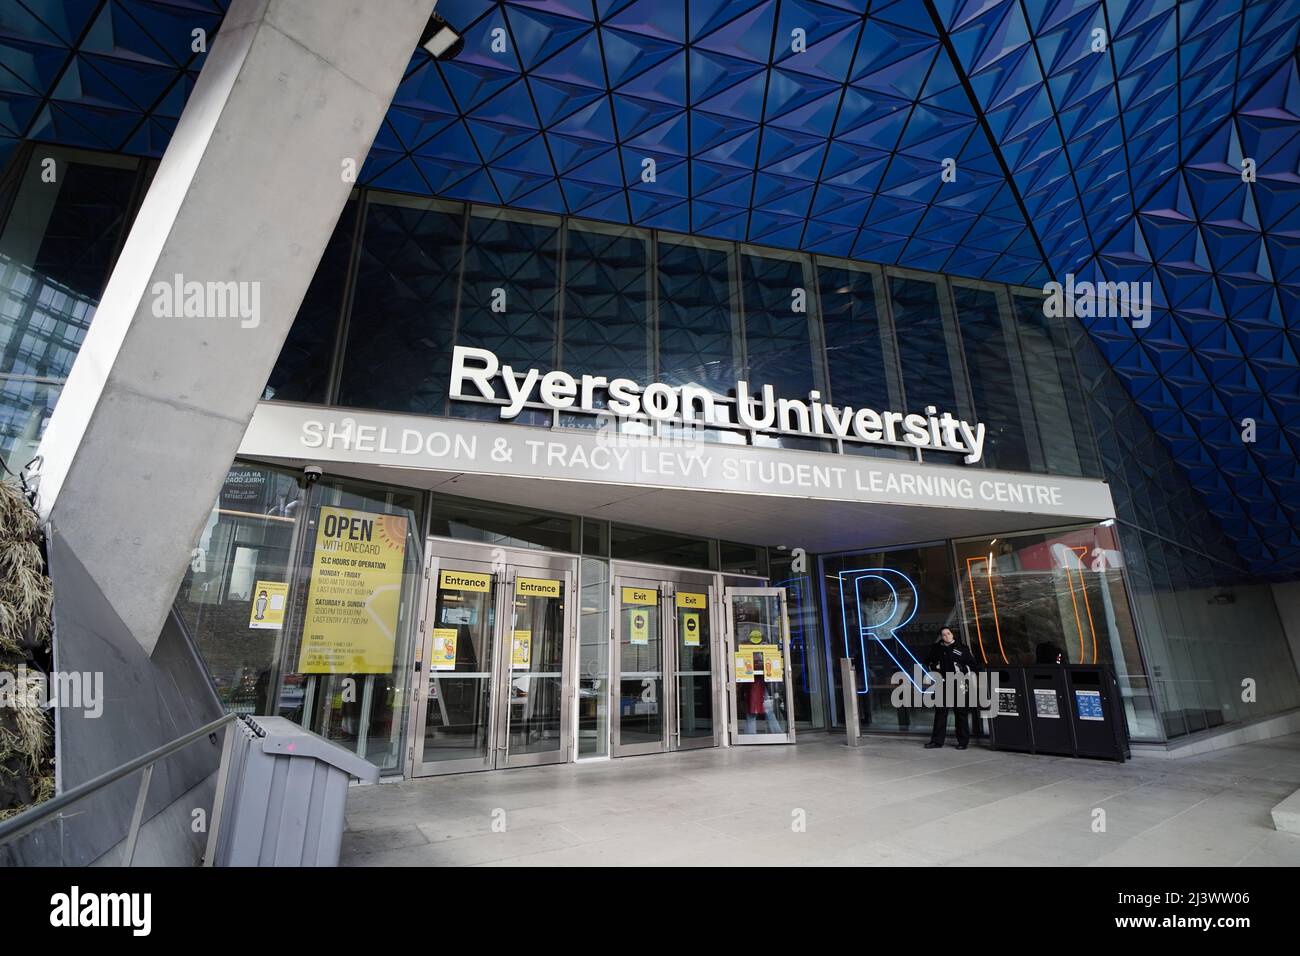 The Sheldon & Tracy Levy Student Learning Centre (SLC) is an iconic structure in the heart of Toronto and a symbolic “front door” of the Ryerson Unive Stock Photo